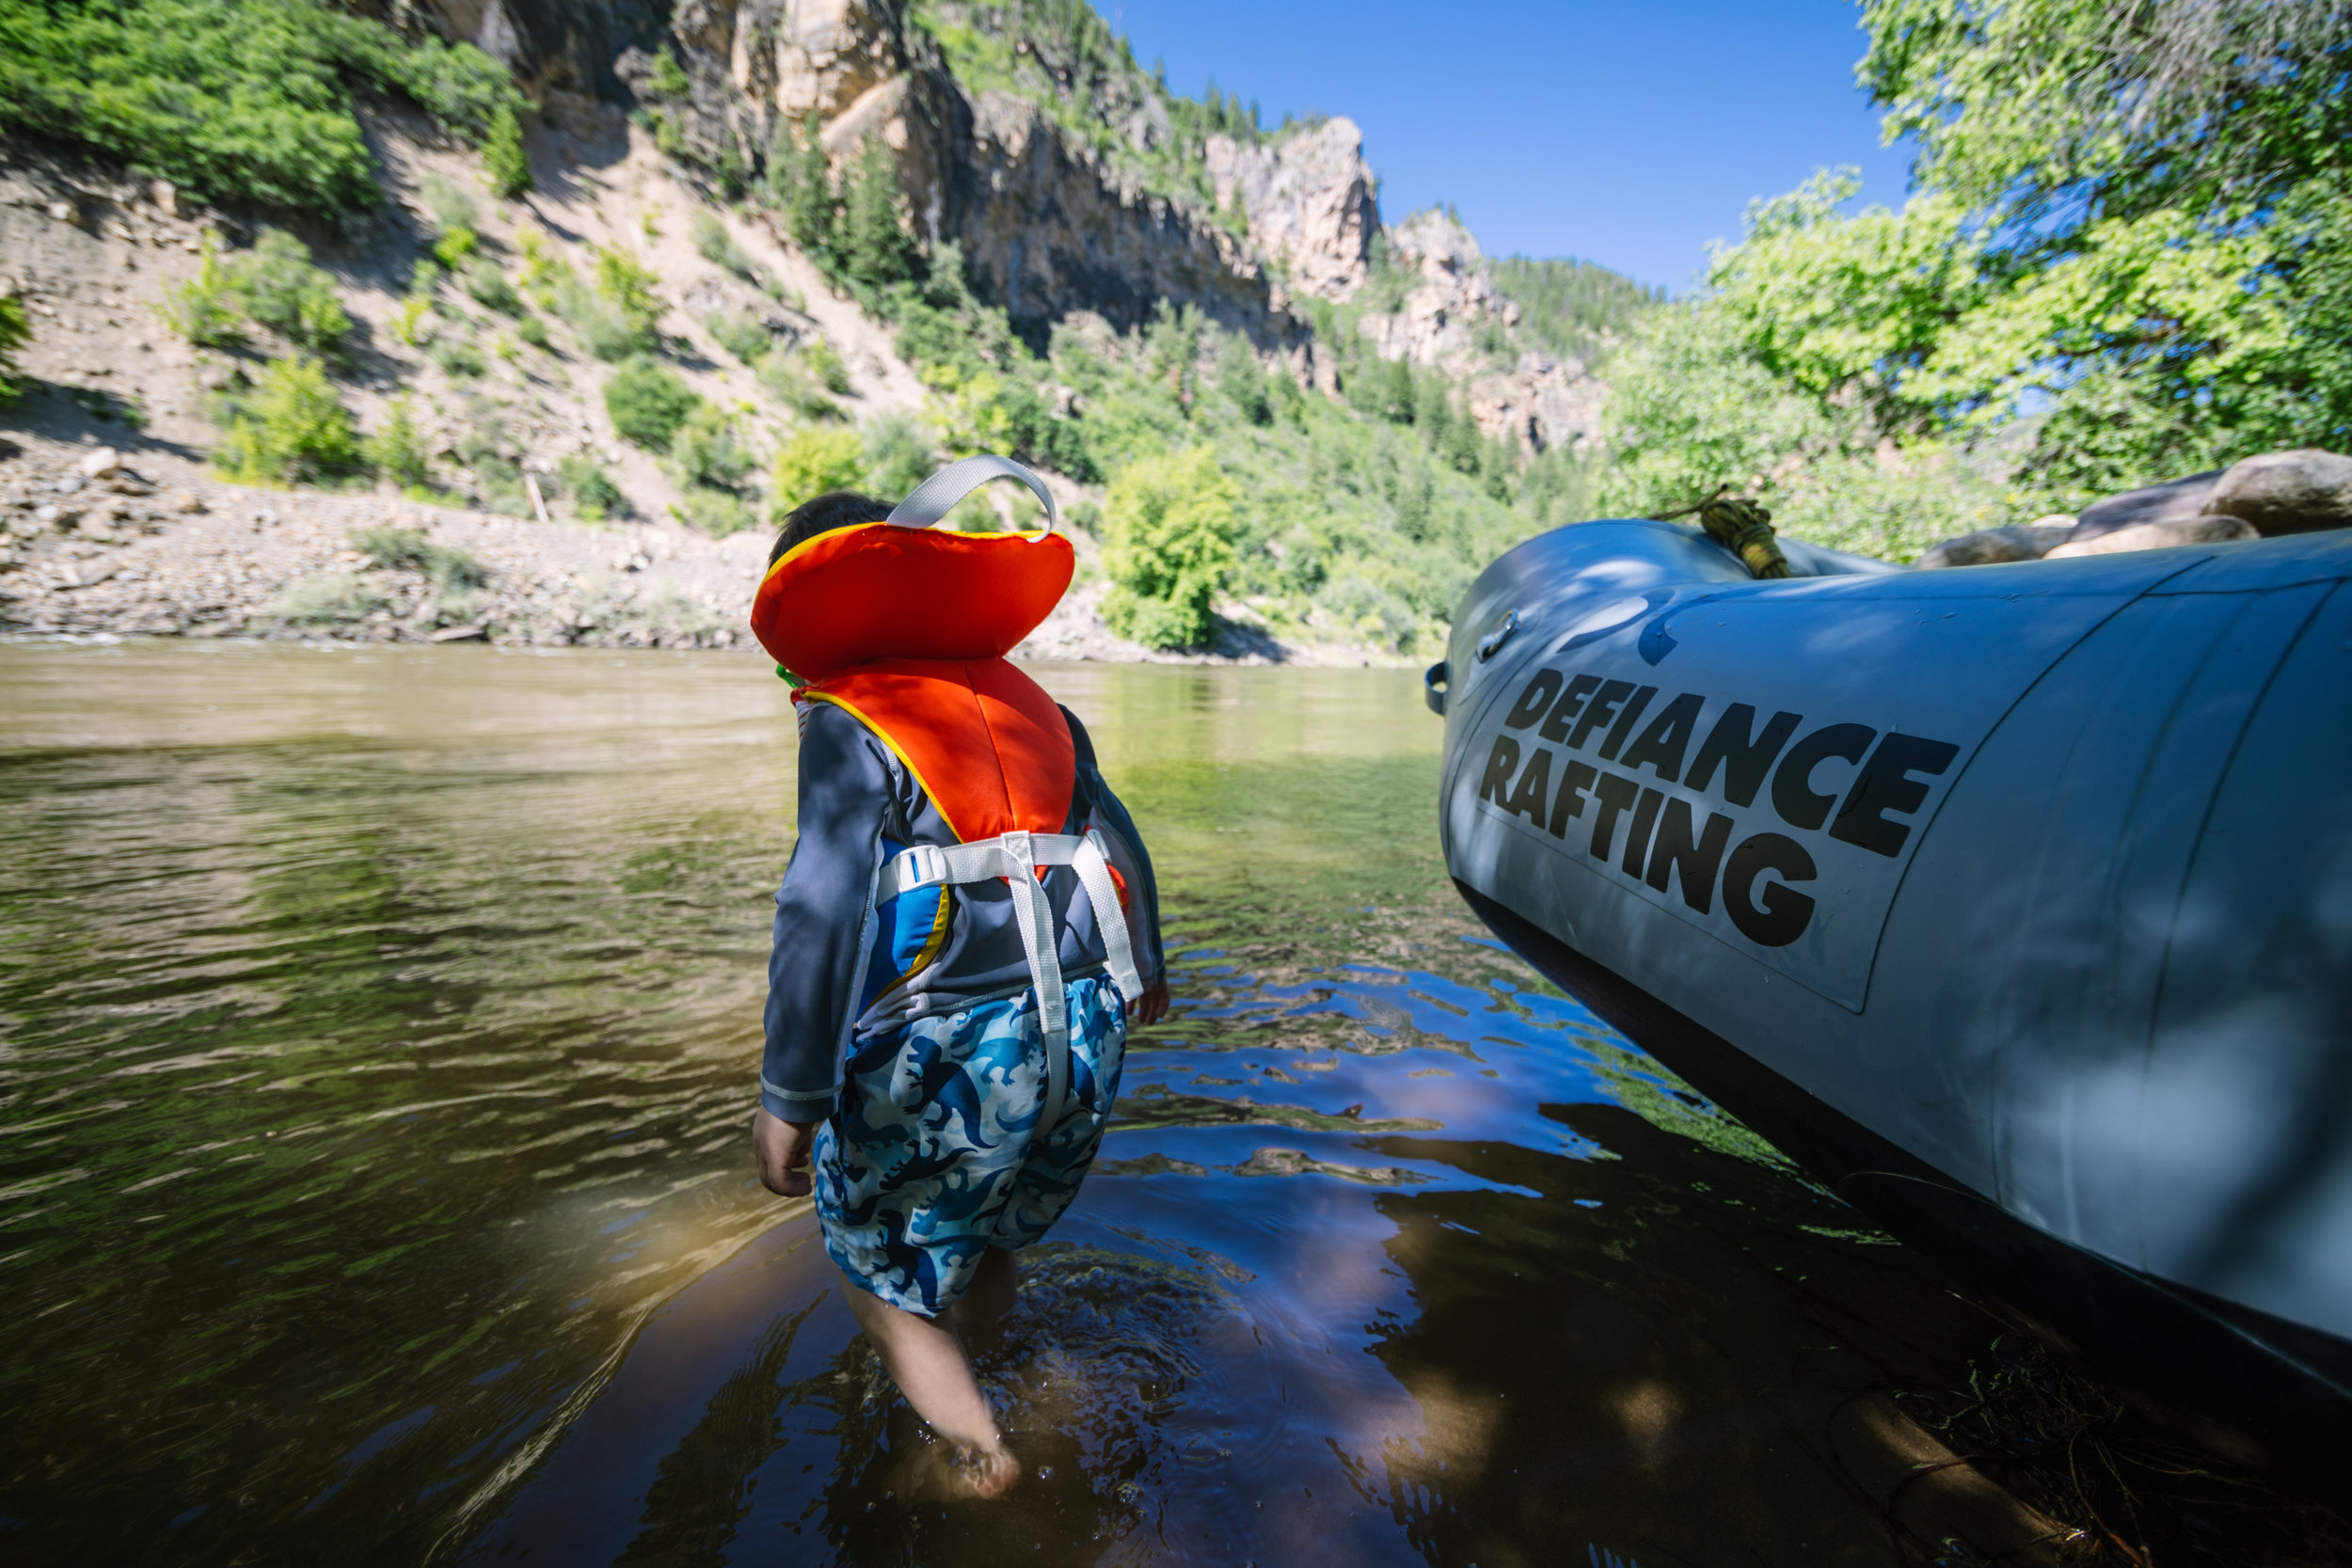 Defiance Rafting - Scenic Canyon Float